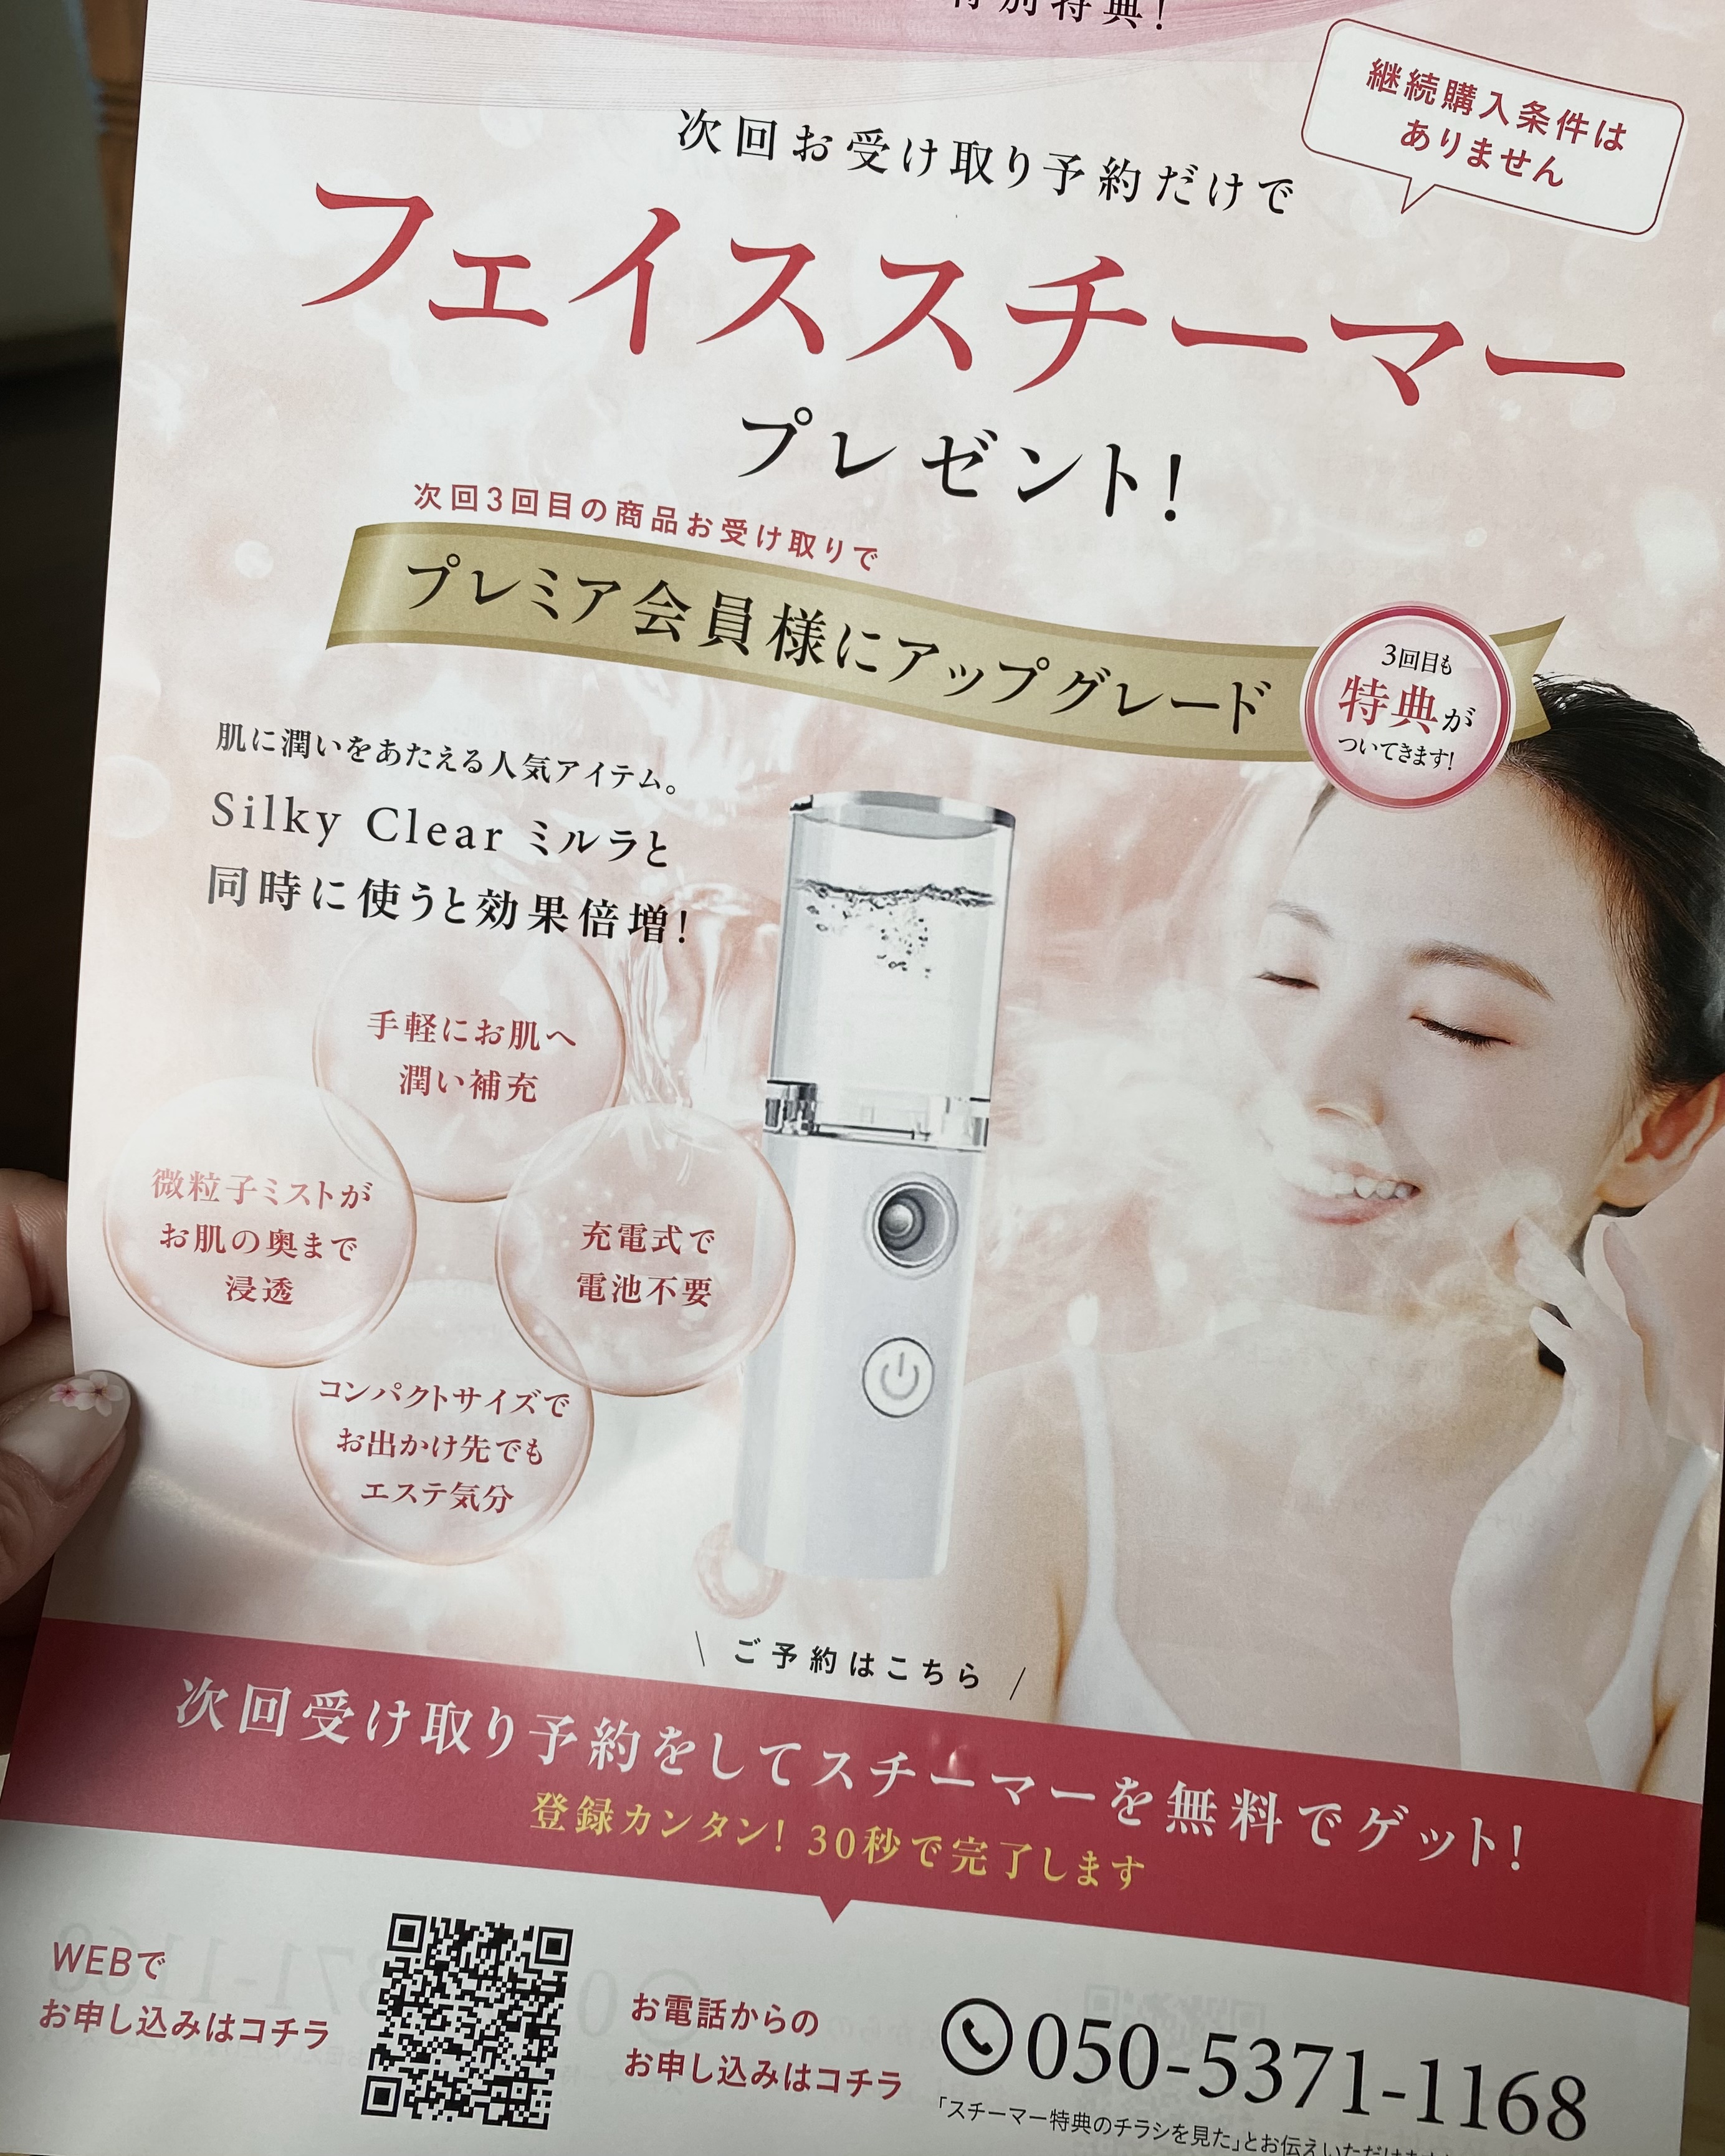 Silky Clear / シルキークリアミルラの公式商品情報｜美容・化粧品情報 